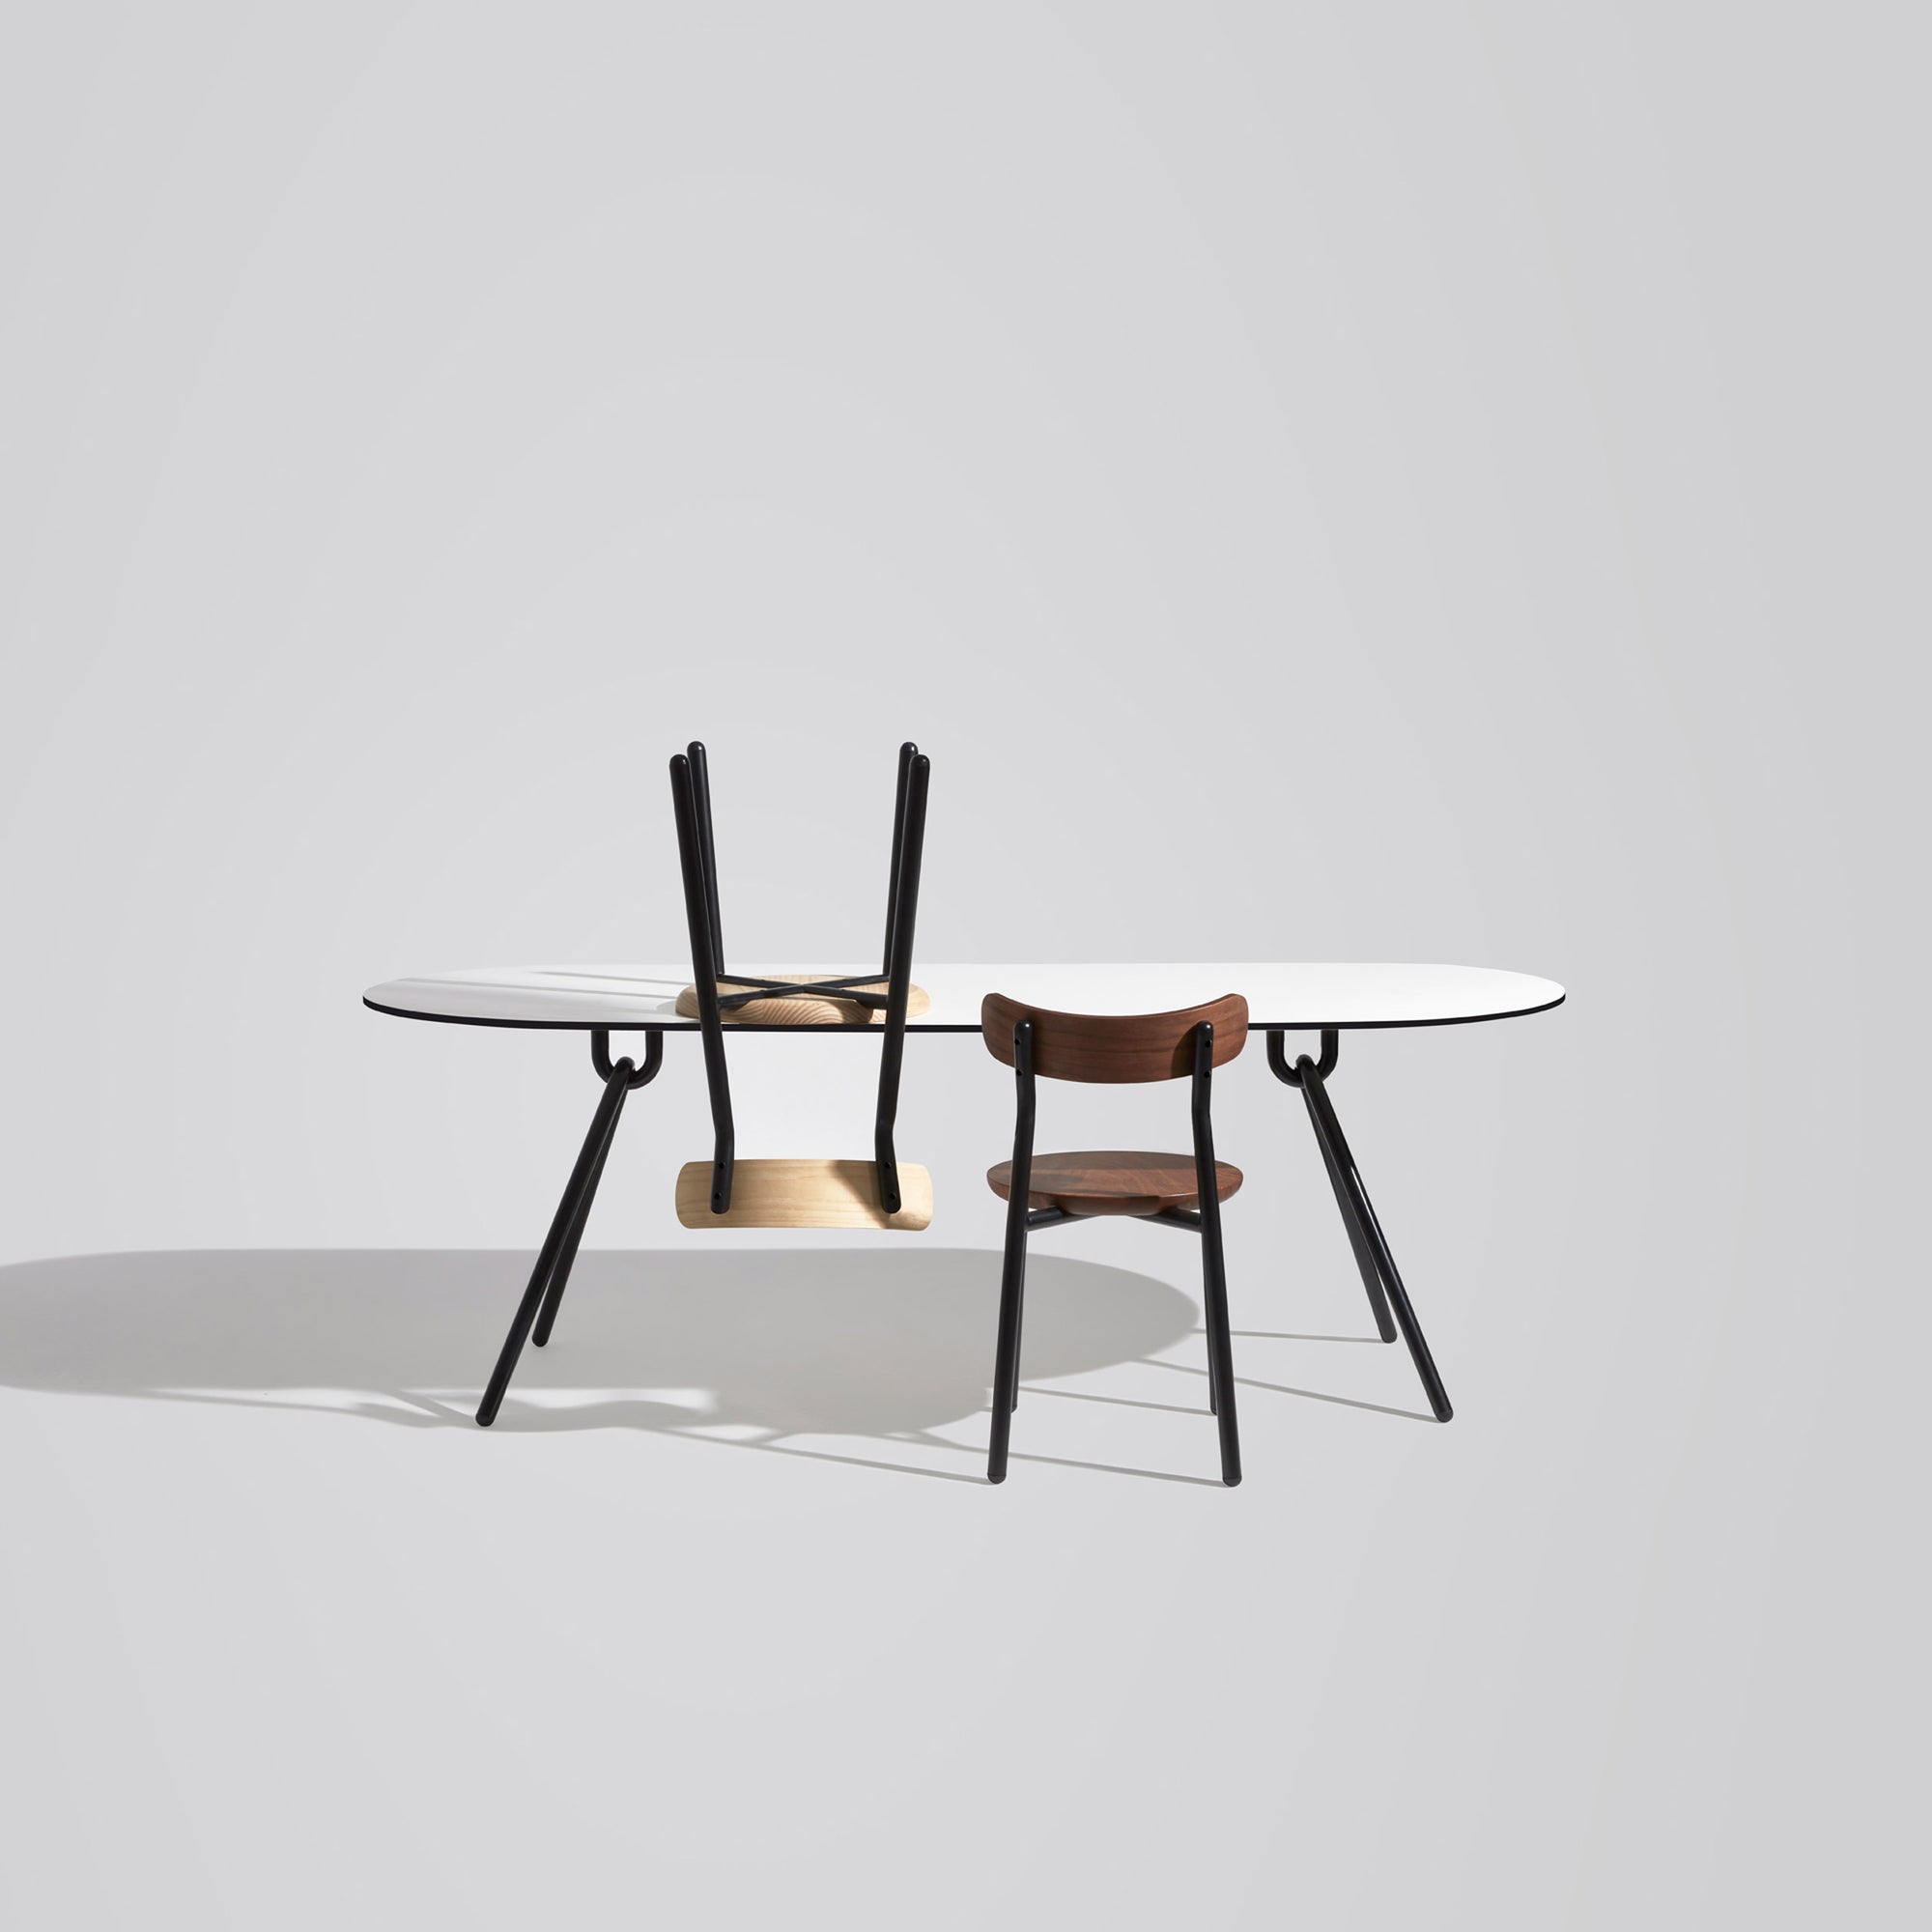 Piper Dining Table - Ellipse | Indoor Outdoor Compact Laminate & Stainless Steel | GibsonKarlo | DesignByThem